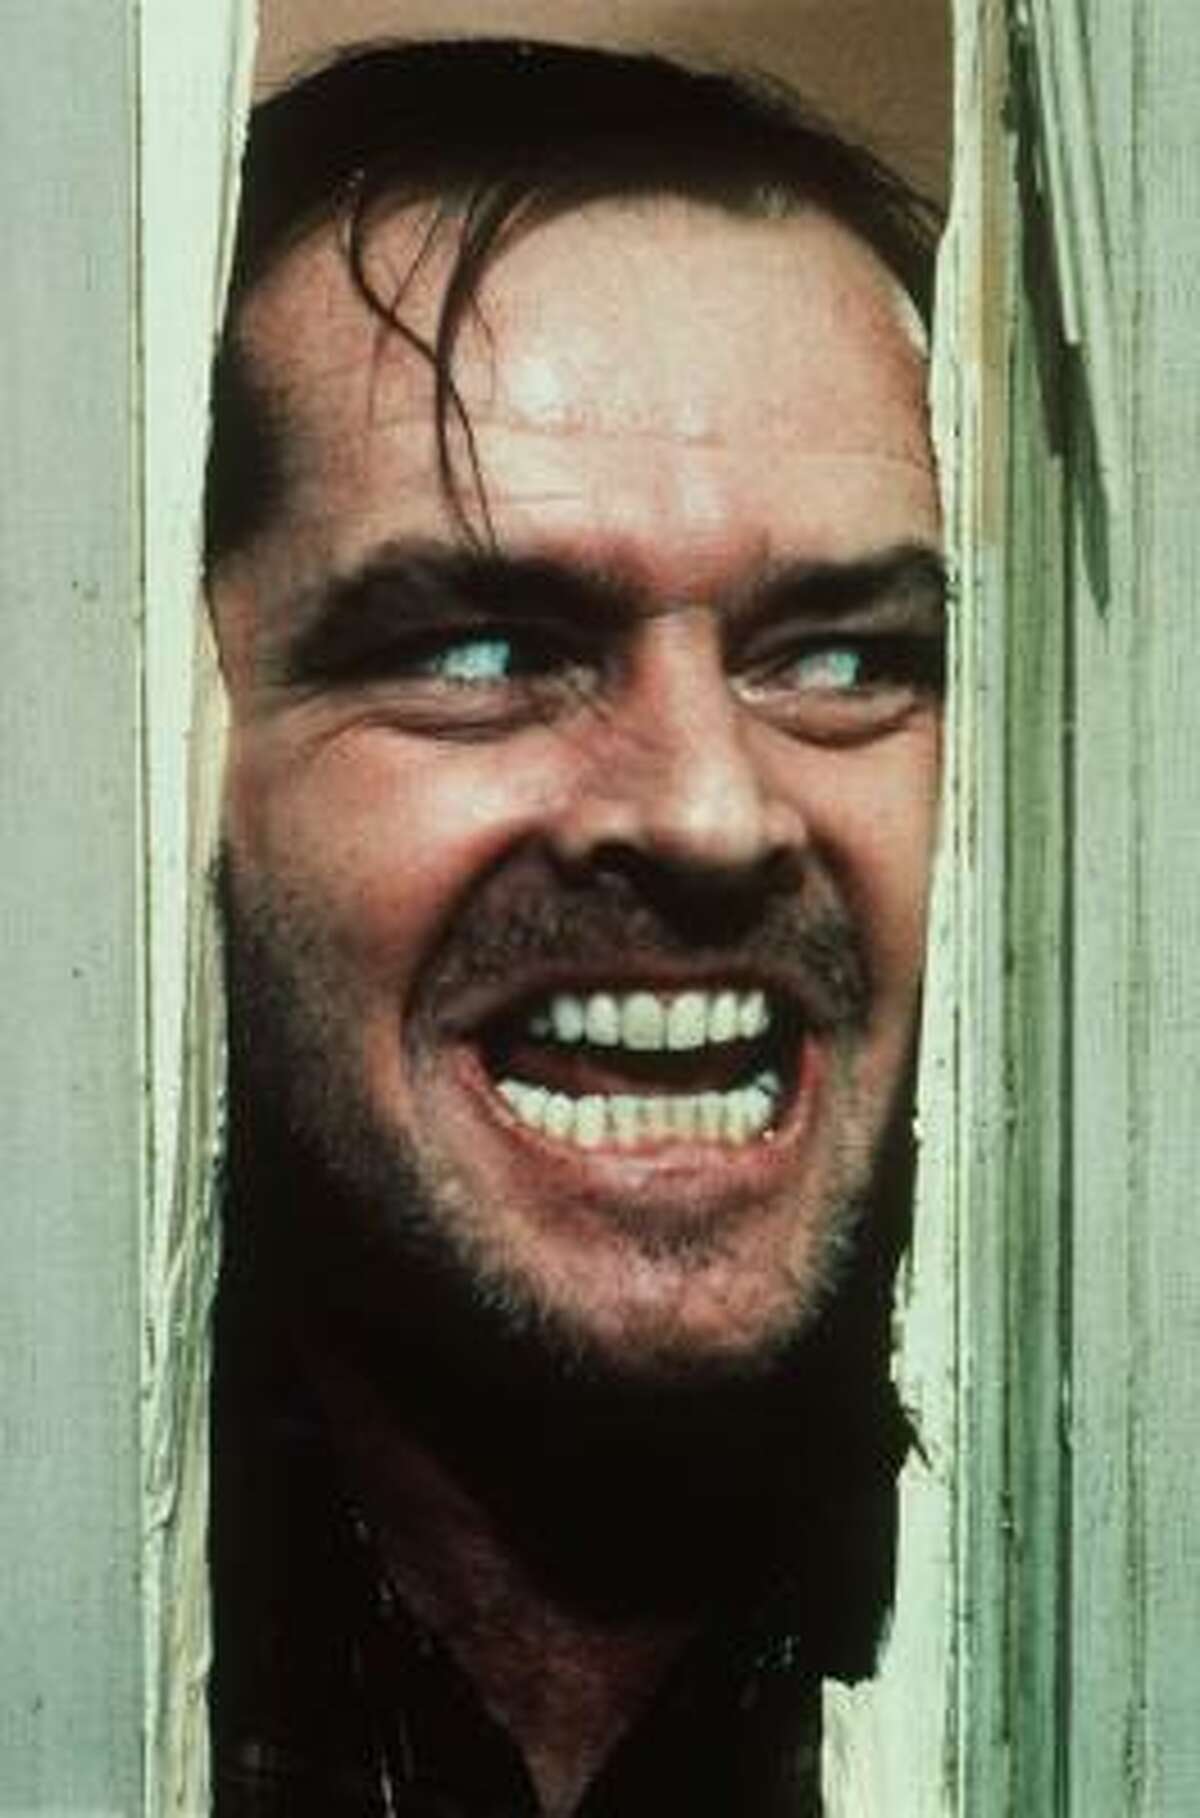 "The Shining" - (1980) Actor Jack Nicholson, portraying 'Jack Torrance.' directed by Stanley Kubrick. All time Classic scary movie